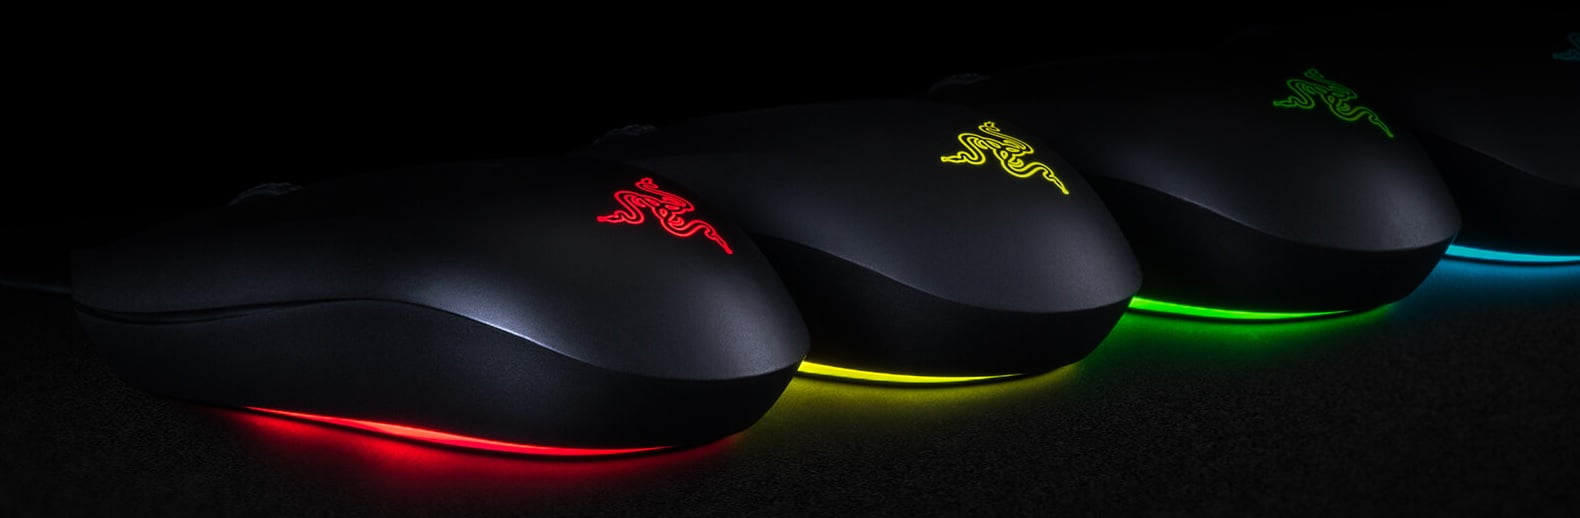 Razer Abyssus Essential gaming mouse inceleme